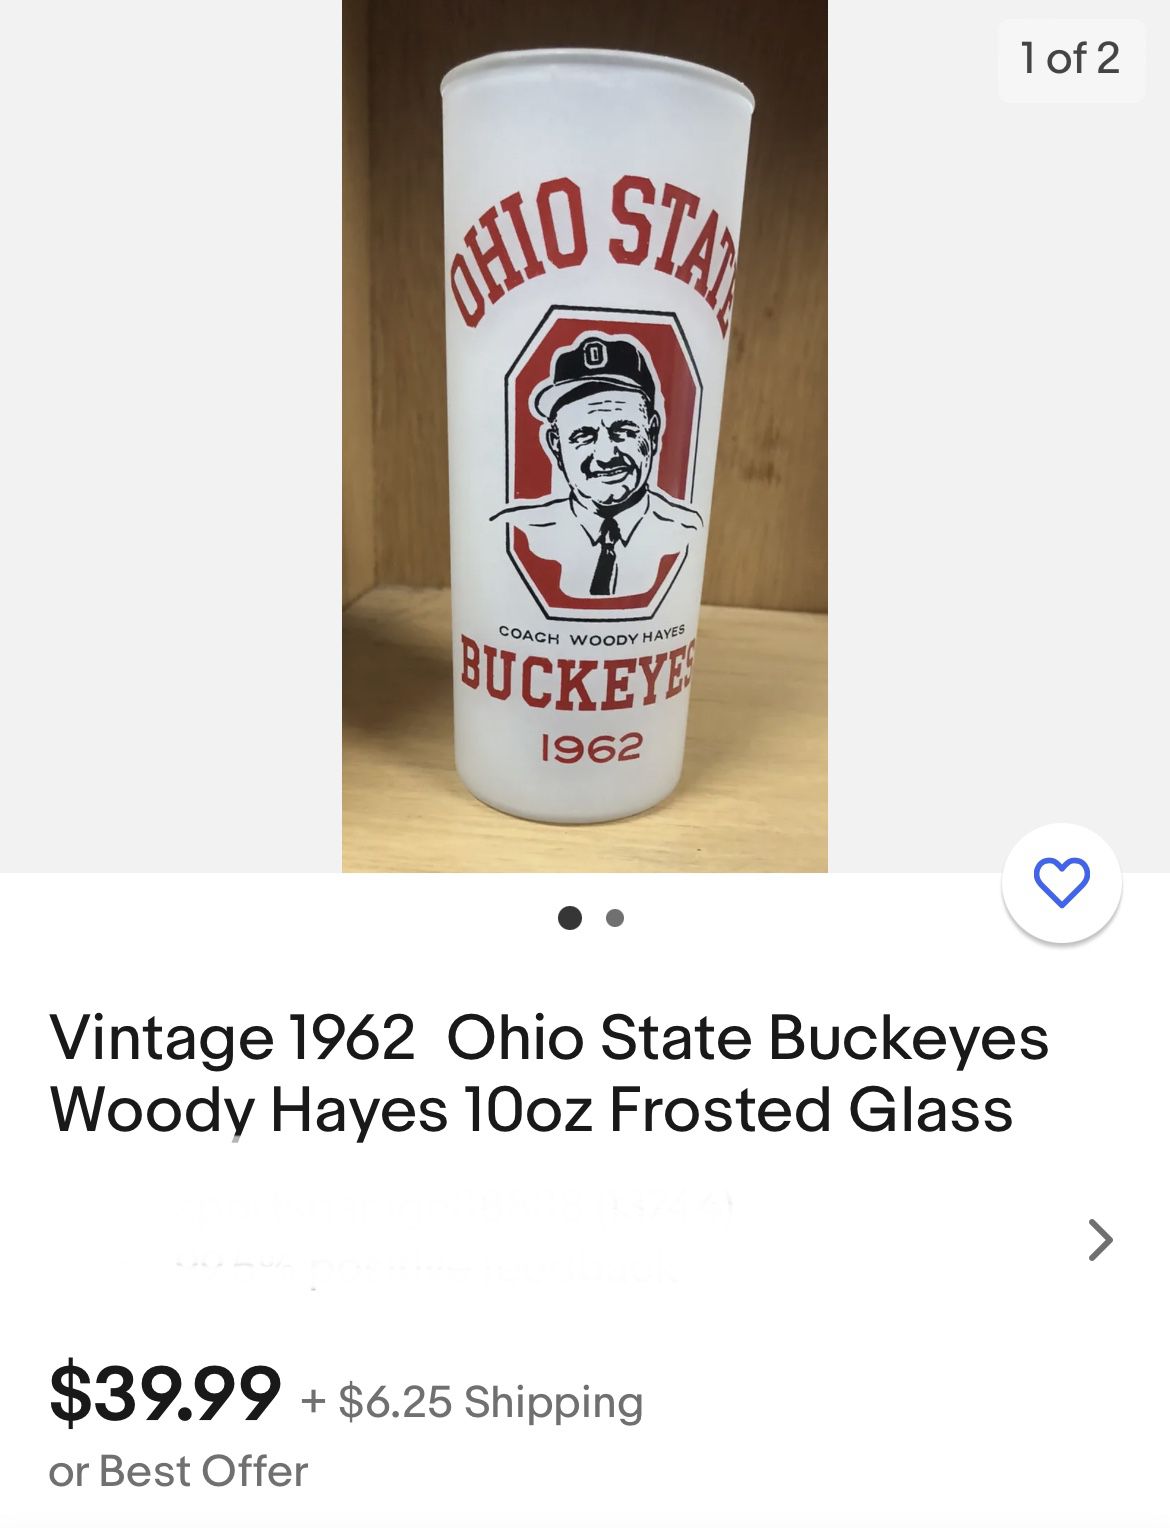 Vintage Ohio State Buckeyes Coach Woody Hayes 1962 Drinking Glass